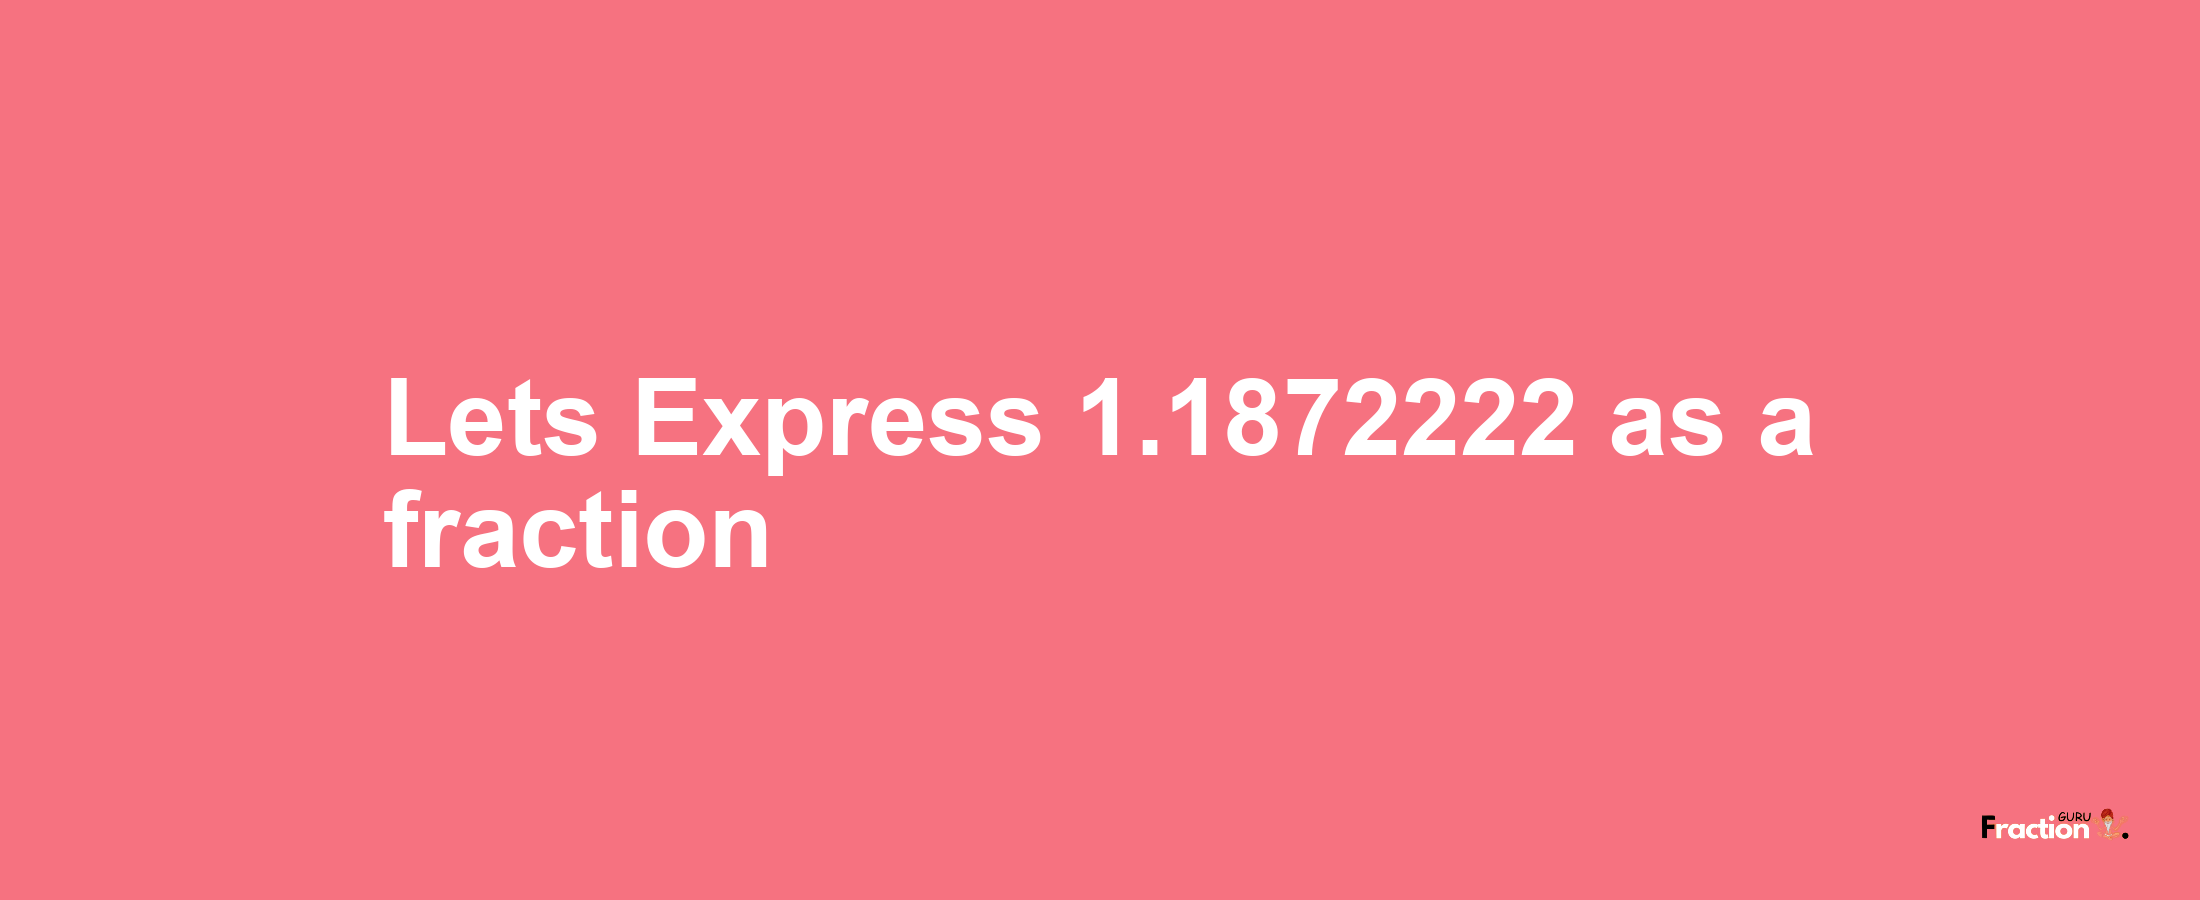 Lets Express 1.1872222 as afraction